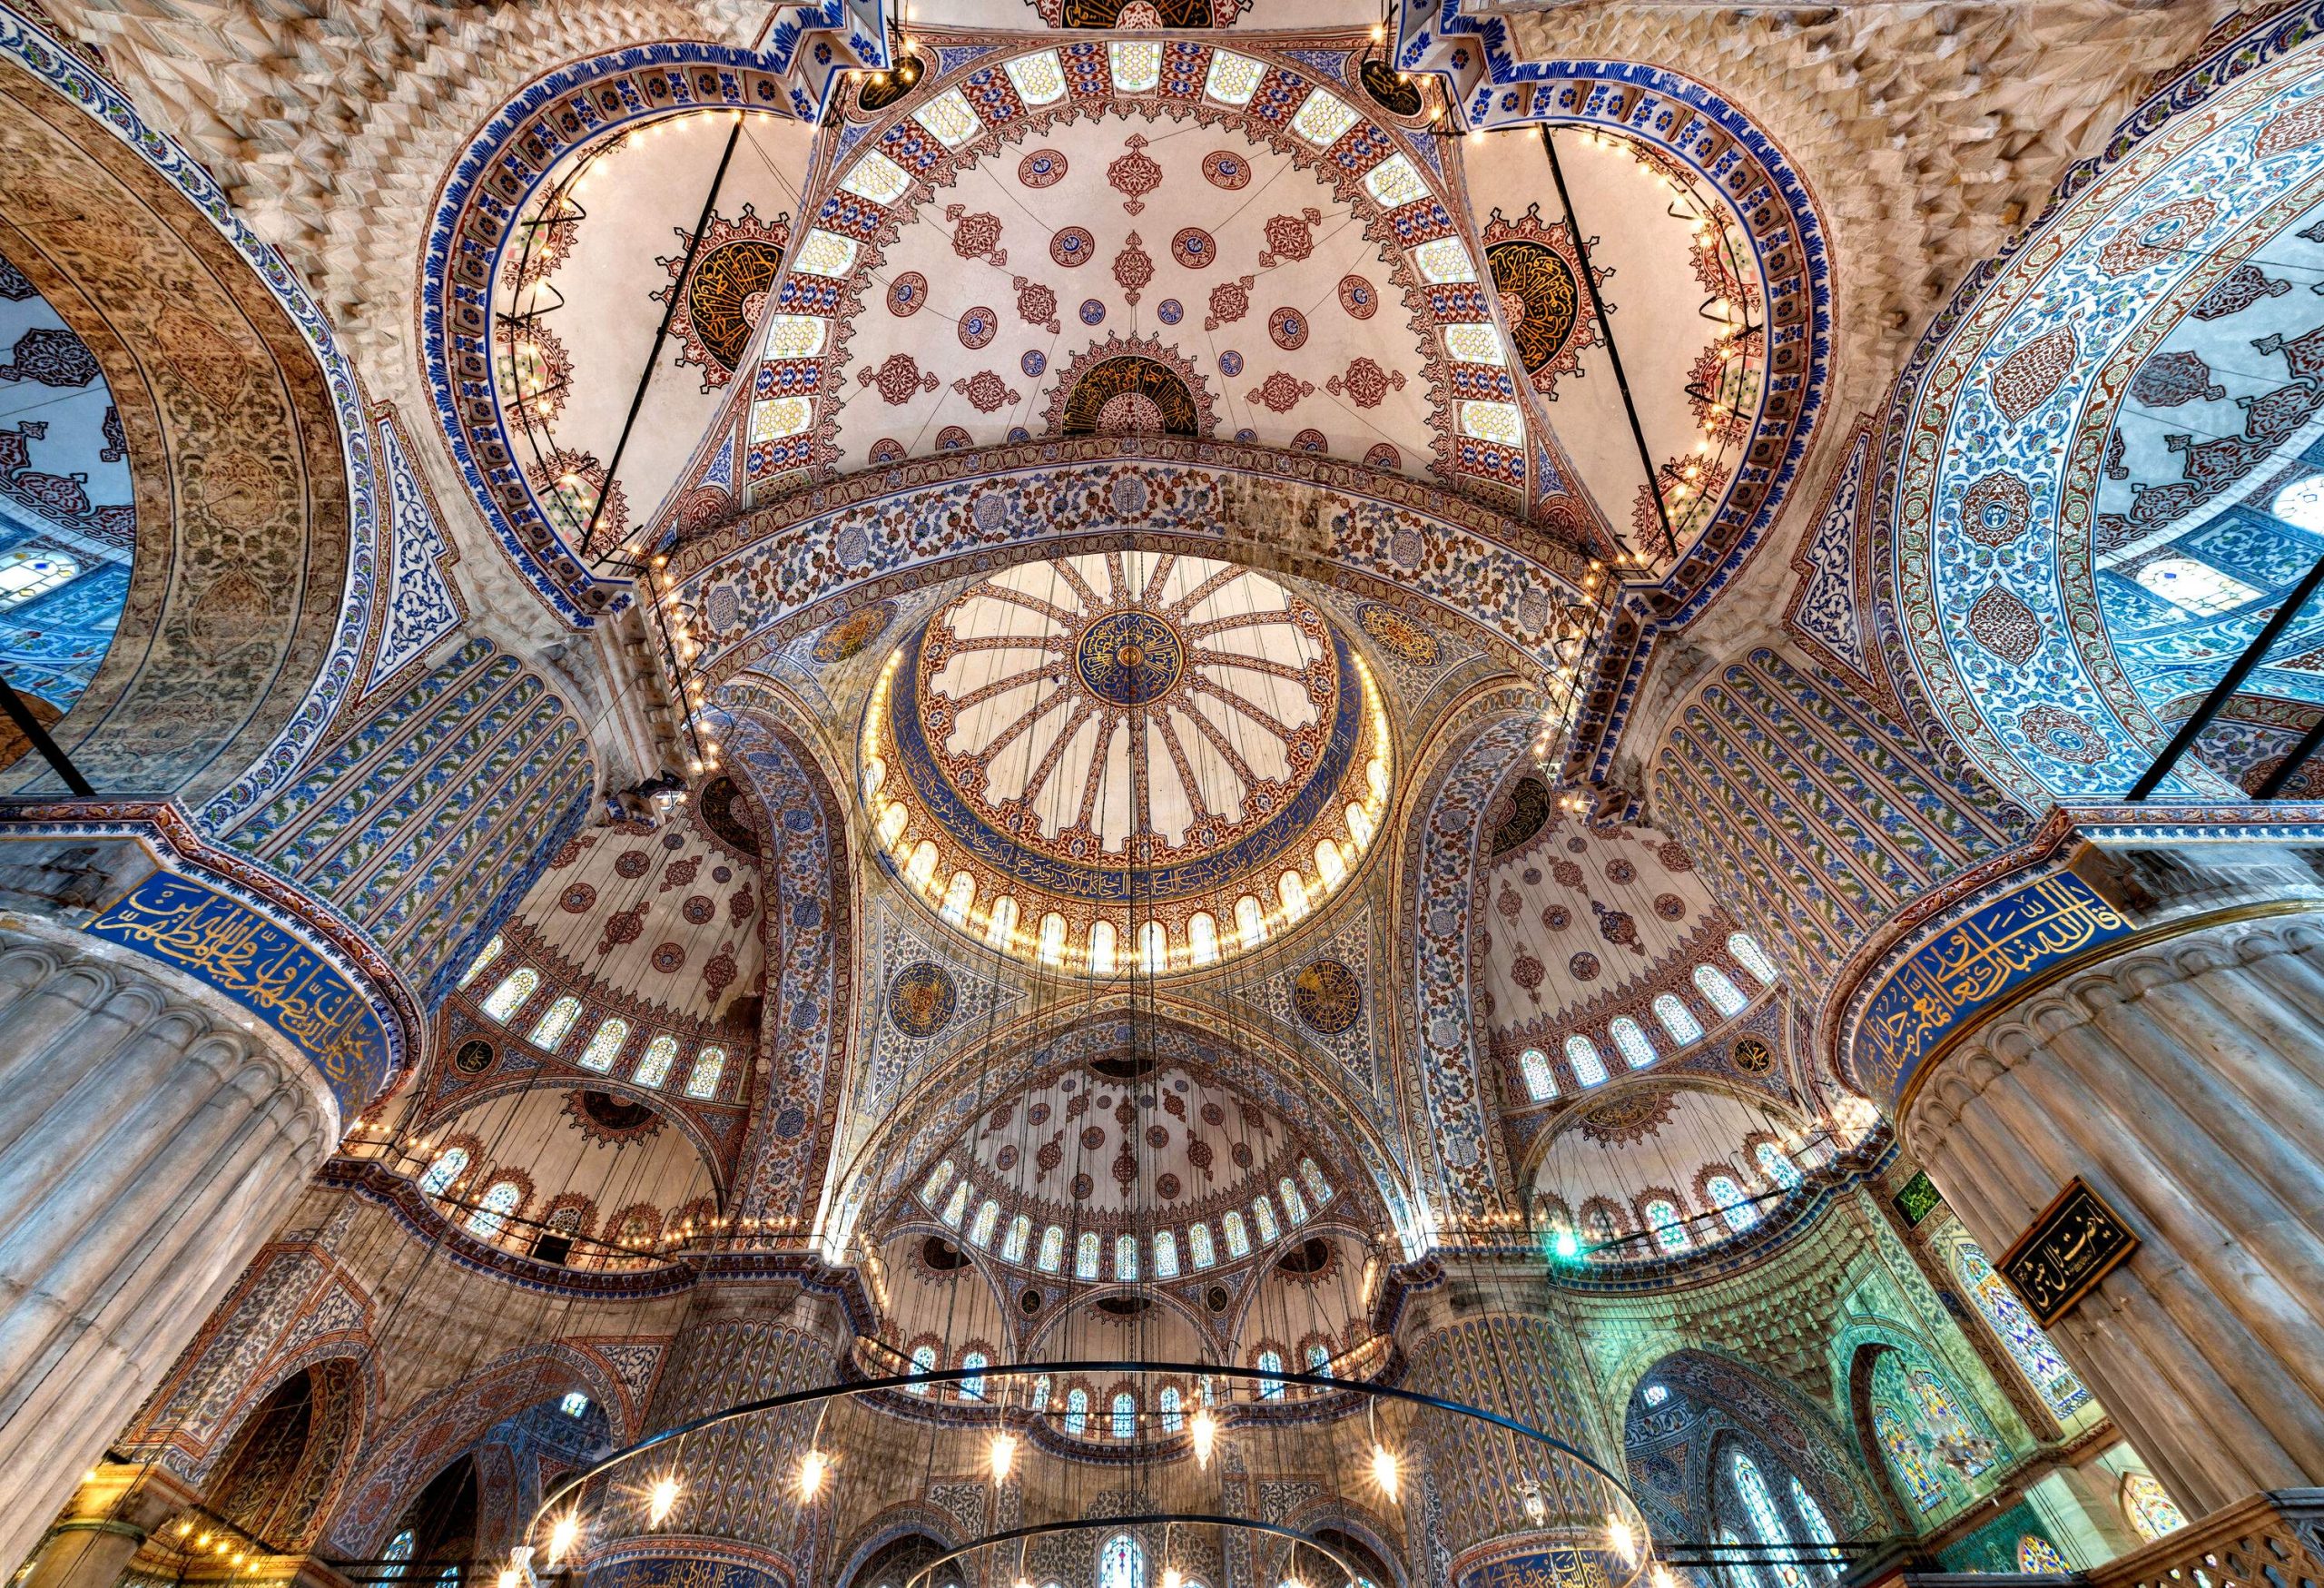 Intricate details of a dome ceiling decorated with uniquely patterned ceramic tiles.